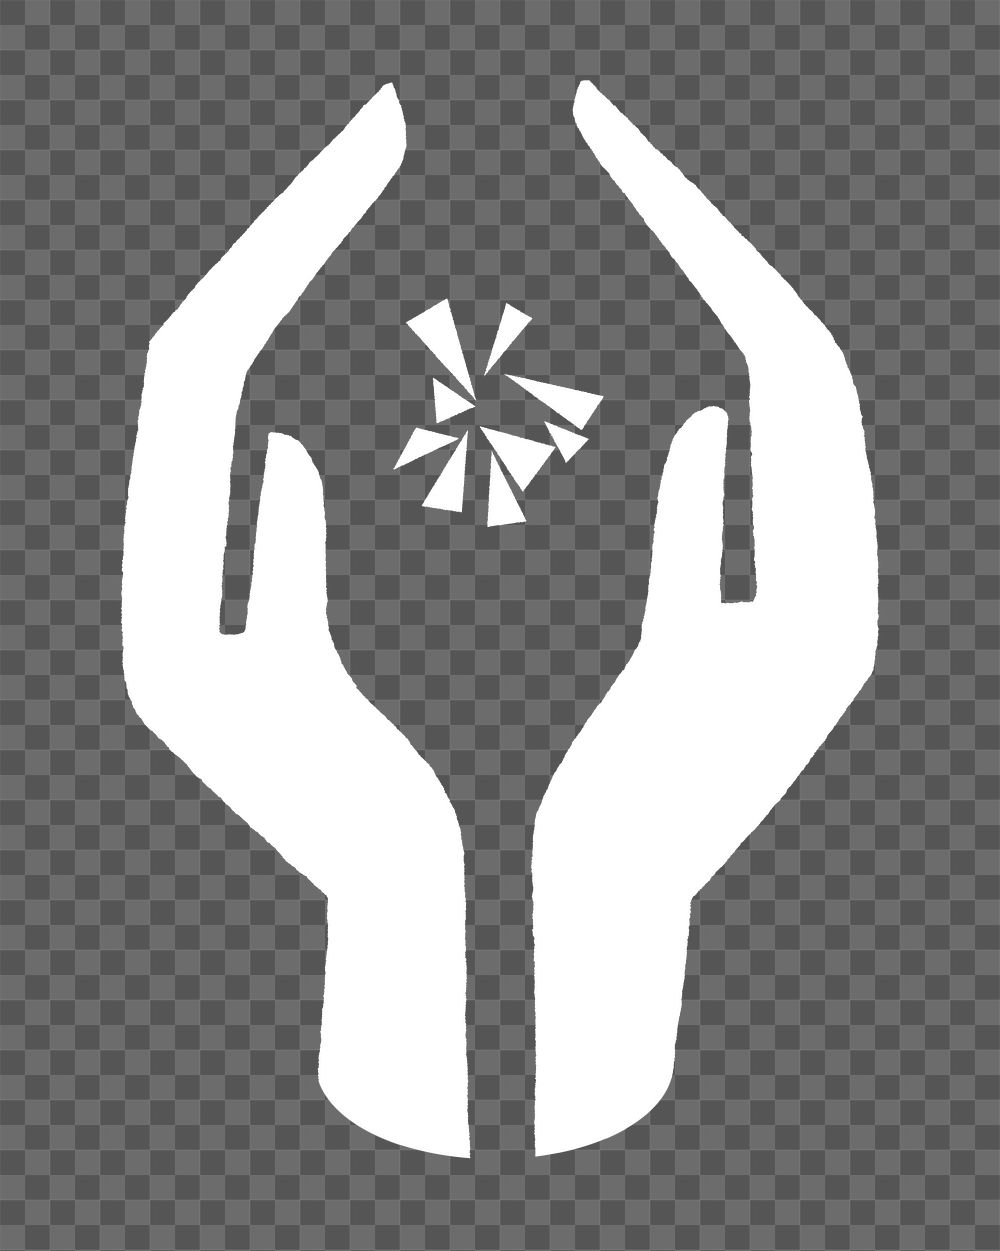 Cupping hands png illustration on transparent background. Remixed by rawpixel.